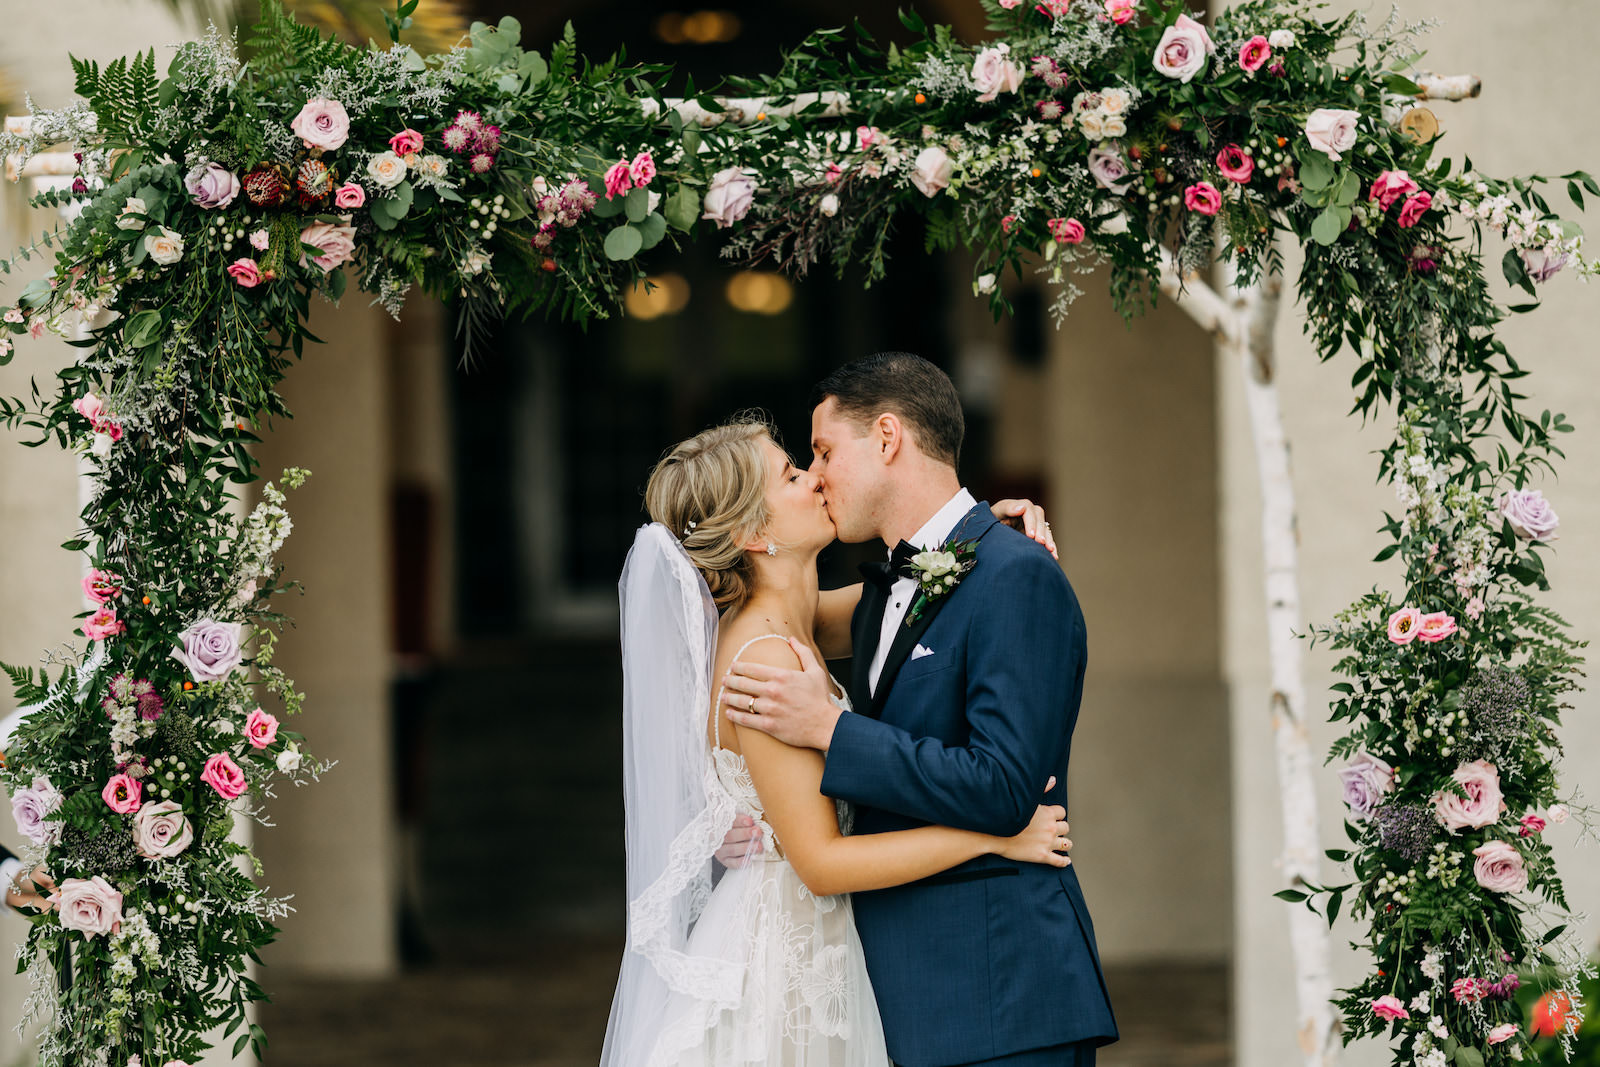 Florida Bride and Groom Exchanging Wedding Vows During Ceremony at Dunedin Wedding Venue The Fenway Hotel, Lush Birch Frame with Greenery, Pink and Purple Roses Flowers | Tampa Bay Wedding Photographer Amber McWhorter Photography | Wedding Florist Leaf It To Us